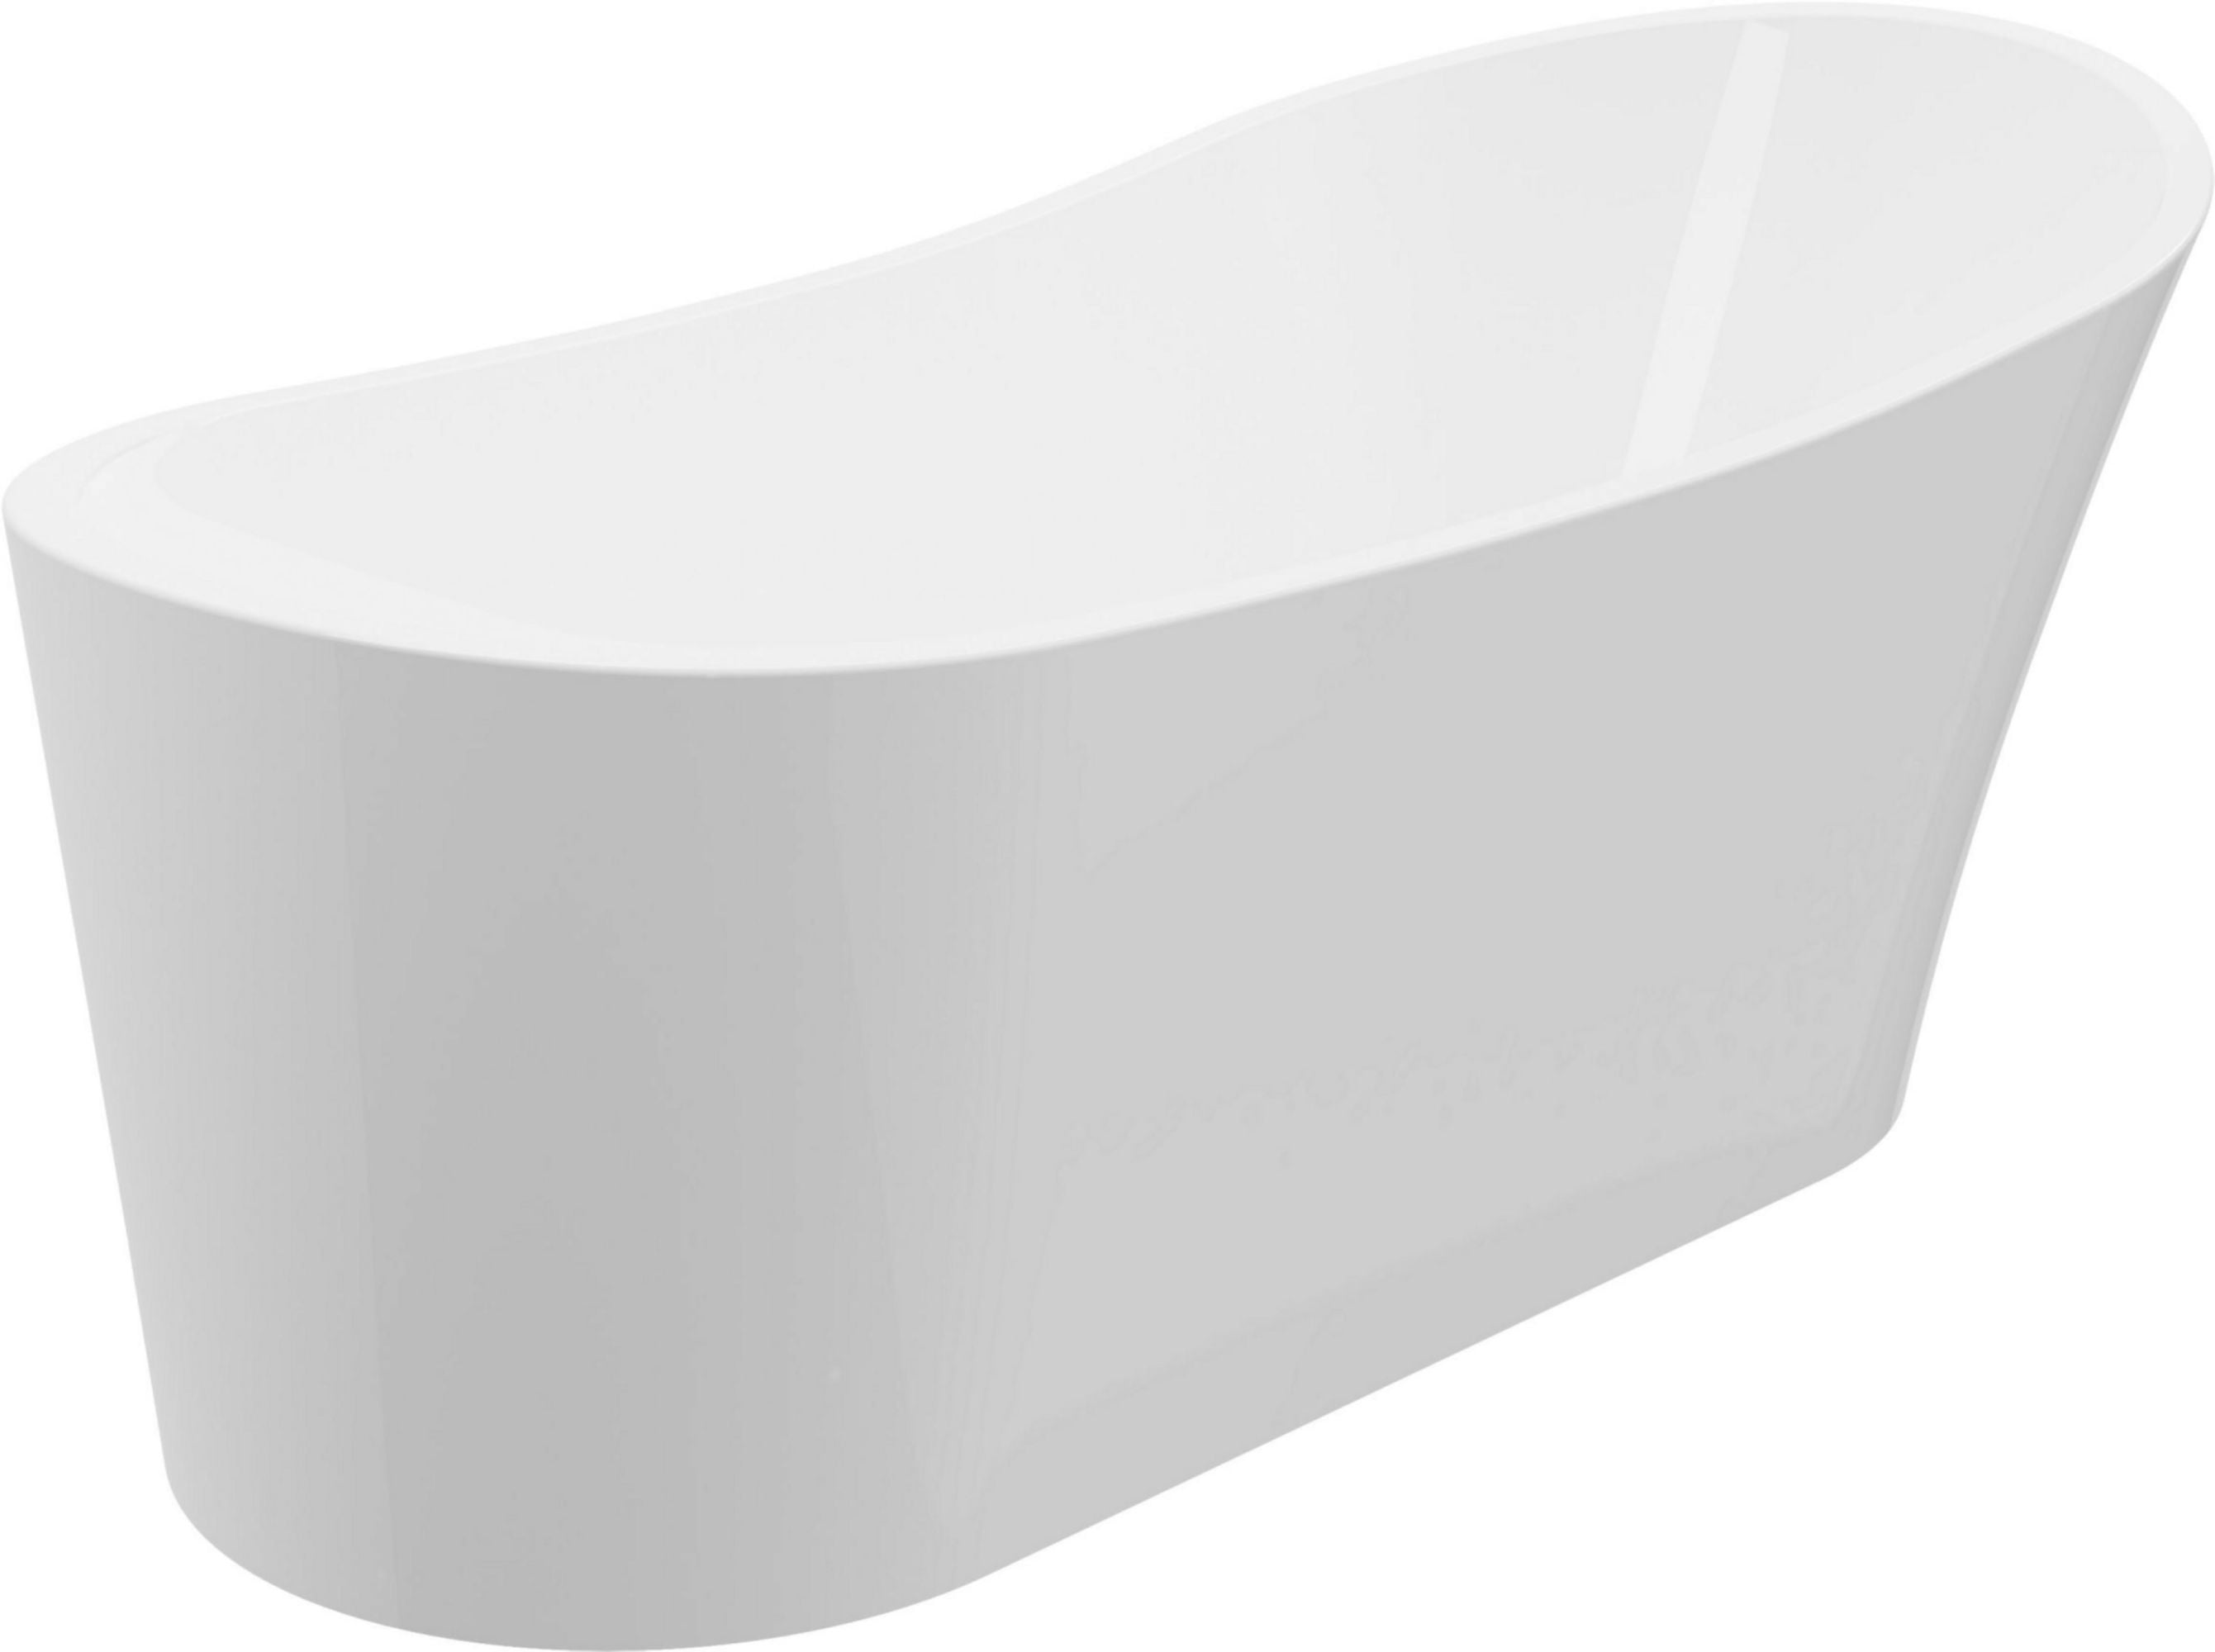 Bt-1096-67-nf 67 In. Paris Freestanding Tub Without Faucet